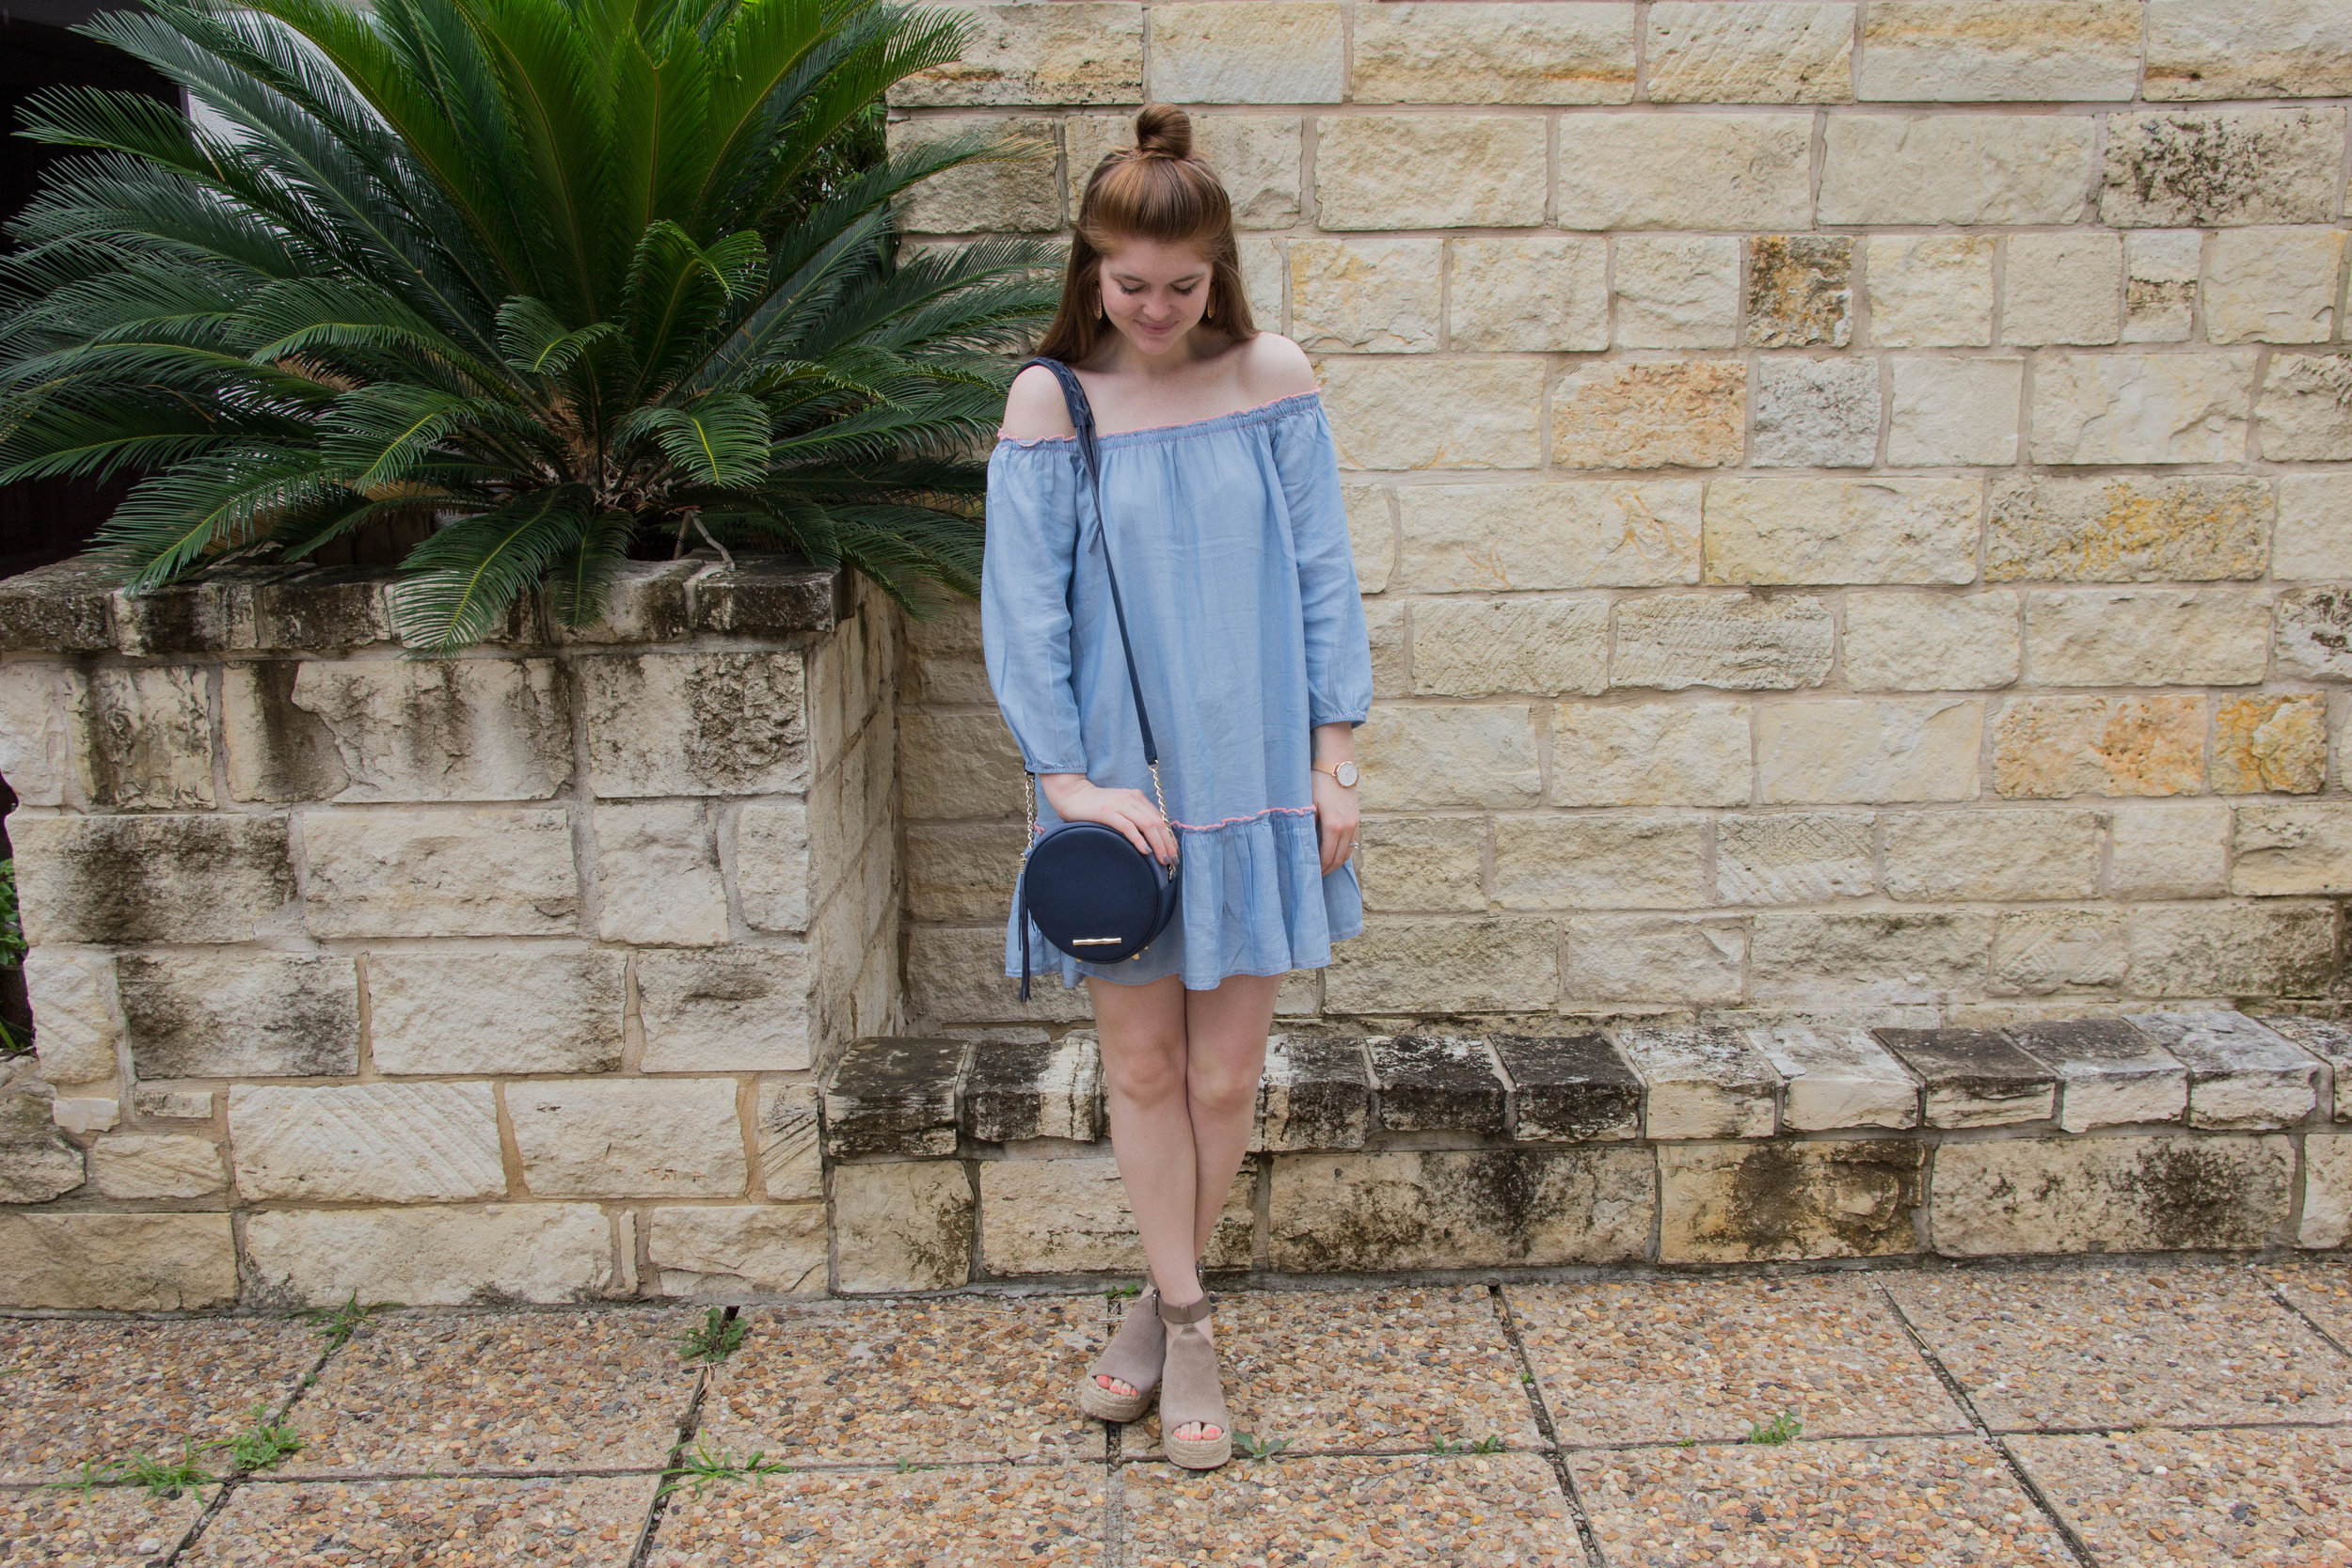 aerie chambray peasant dress, marc fisher annie wedges, daniel wellington classic petite rose gold watch, kendra scott layal earrings, elaine turner shelly bag, round purse, circle purse, transitional circle bag, lments of style, dallas fashion blog…